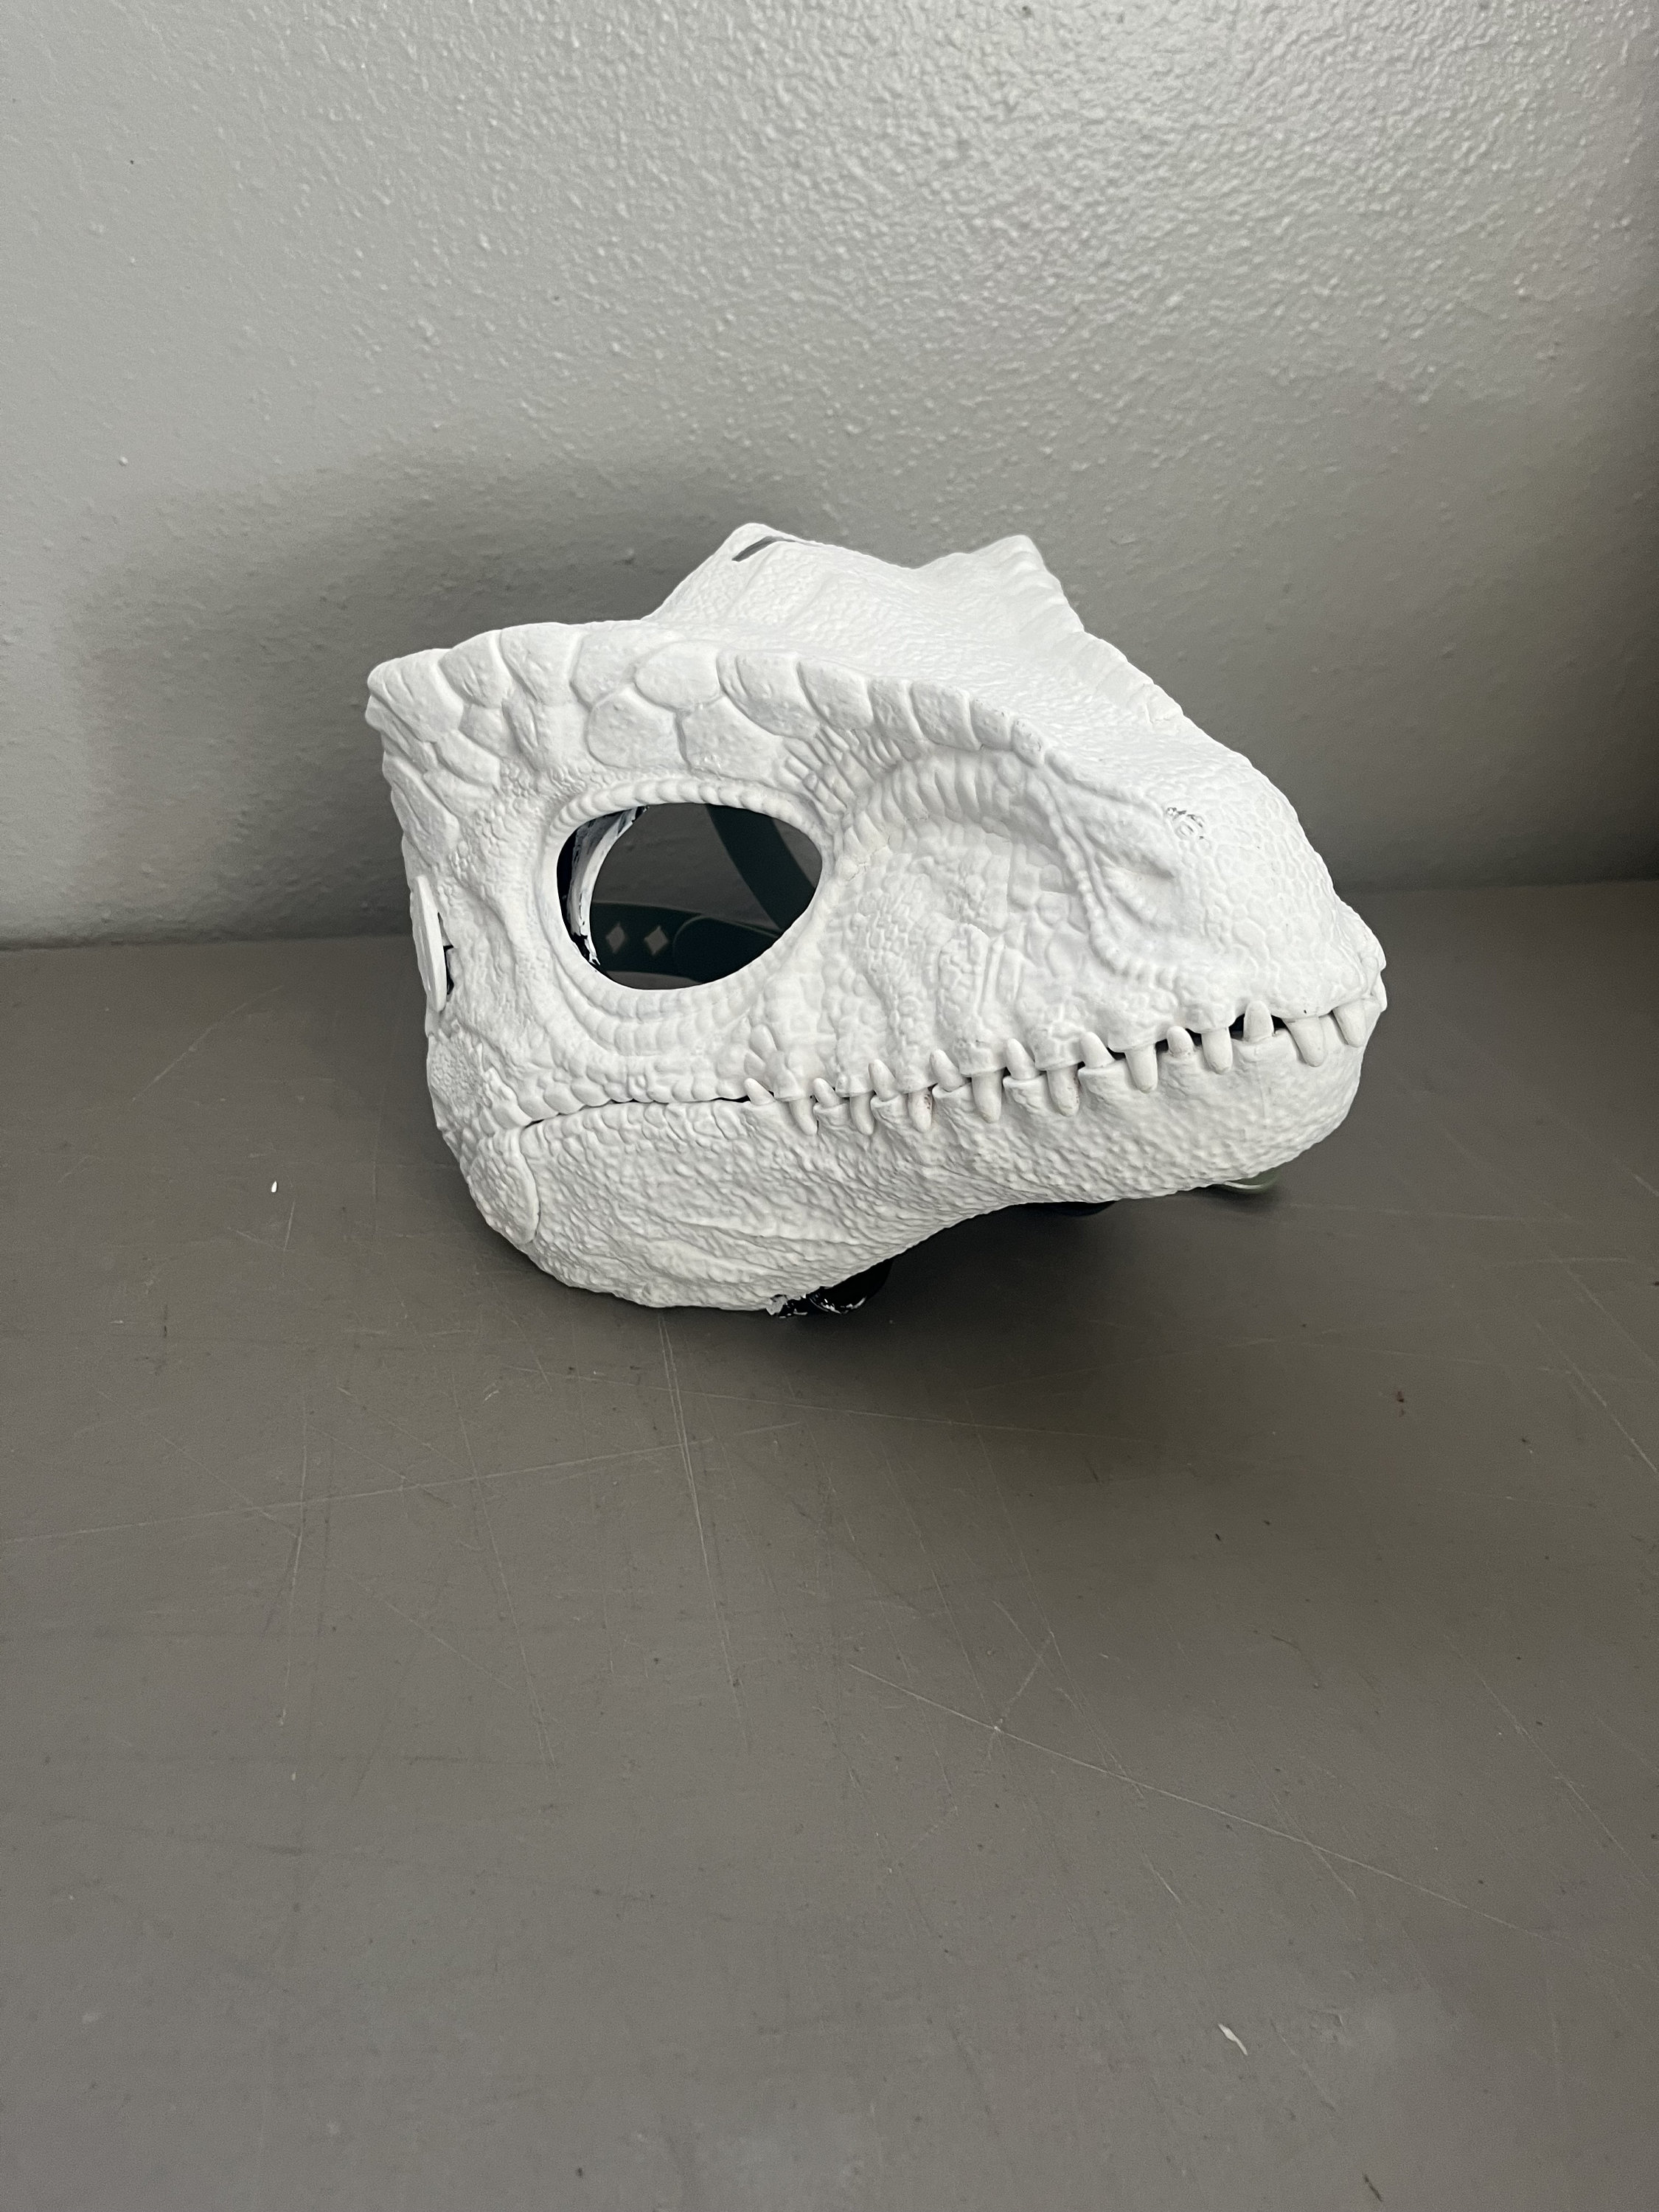  PARTYGEARS Movable Jaw-Dino Mask Moving Jaw Decor